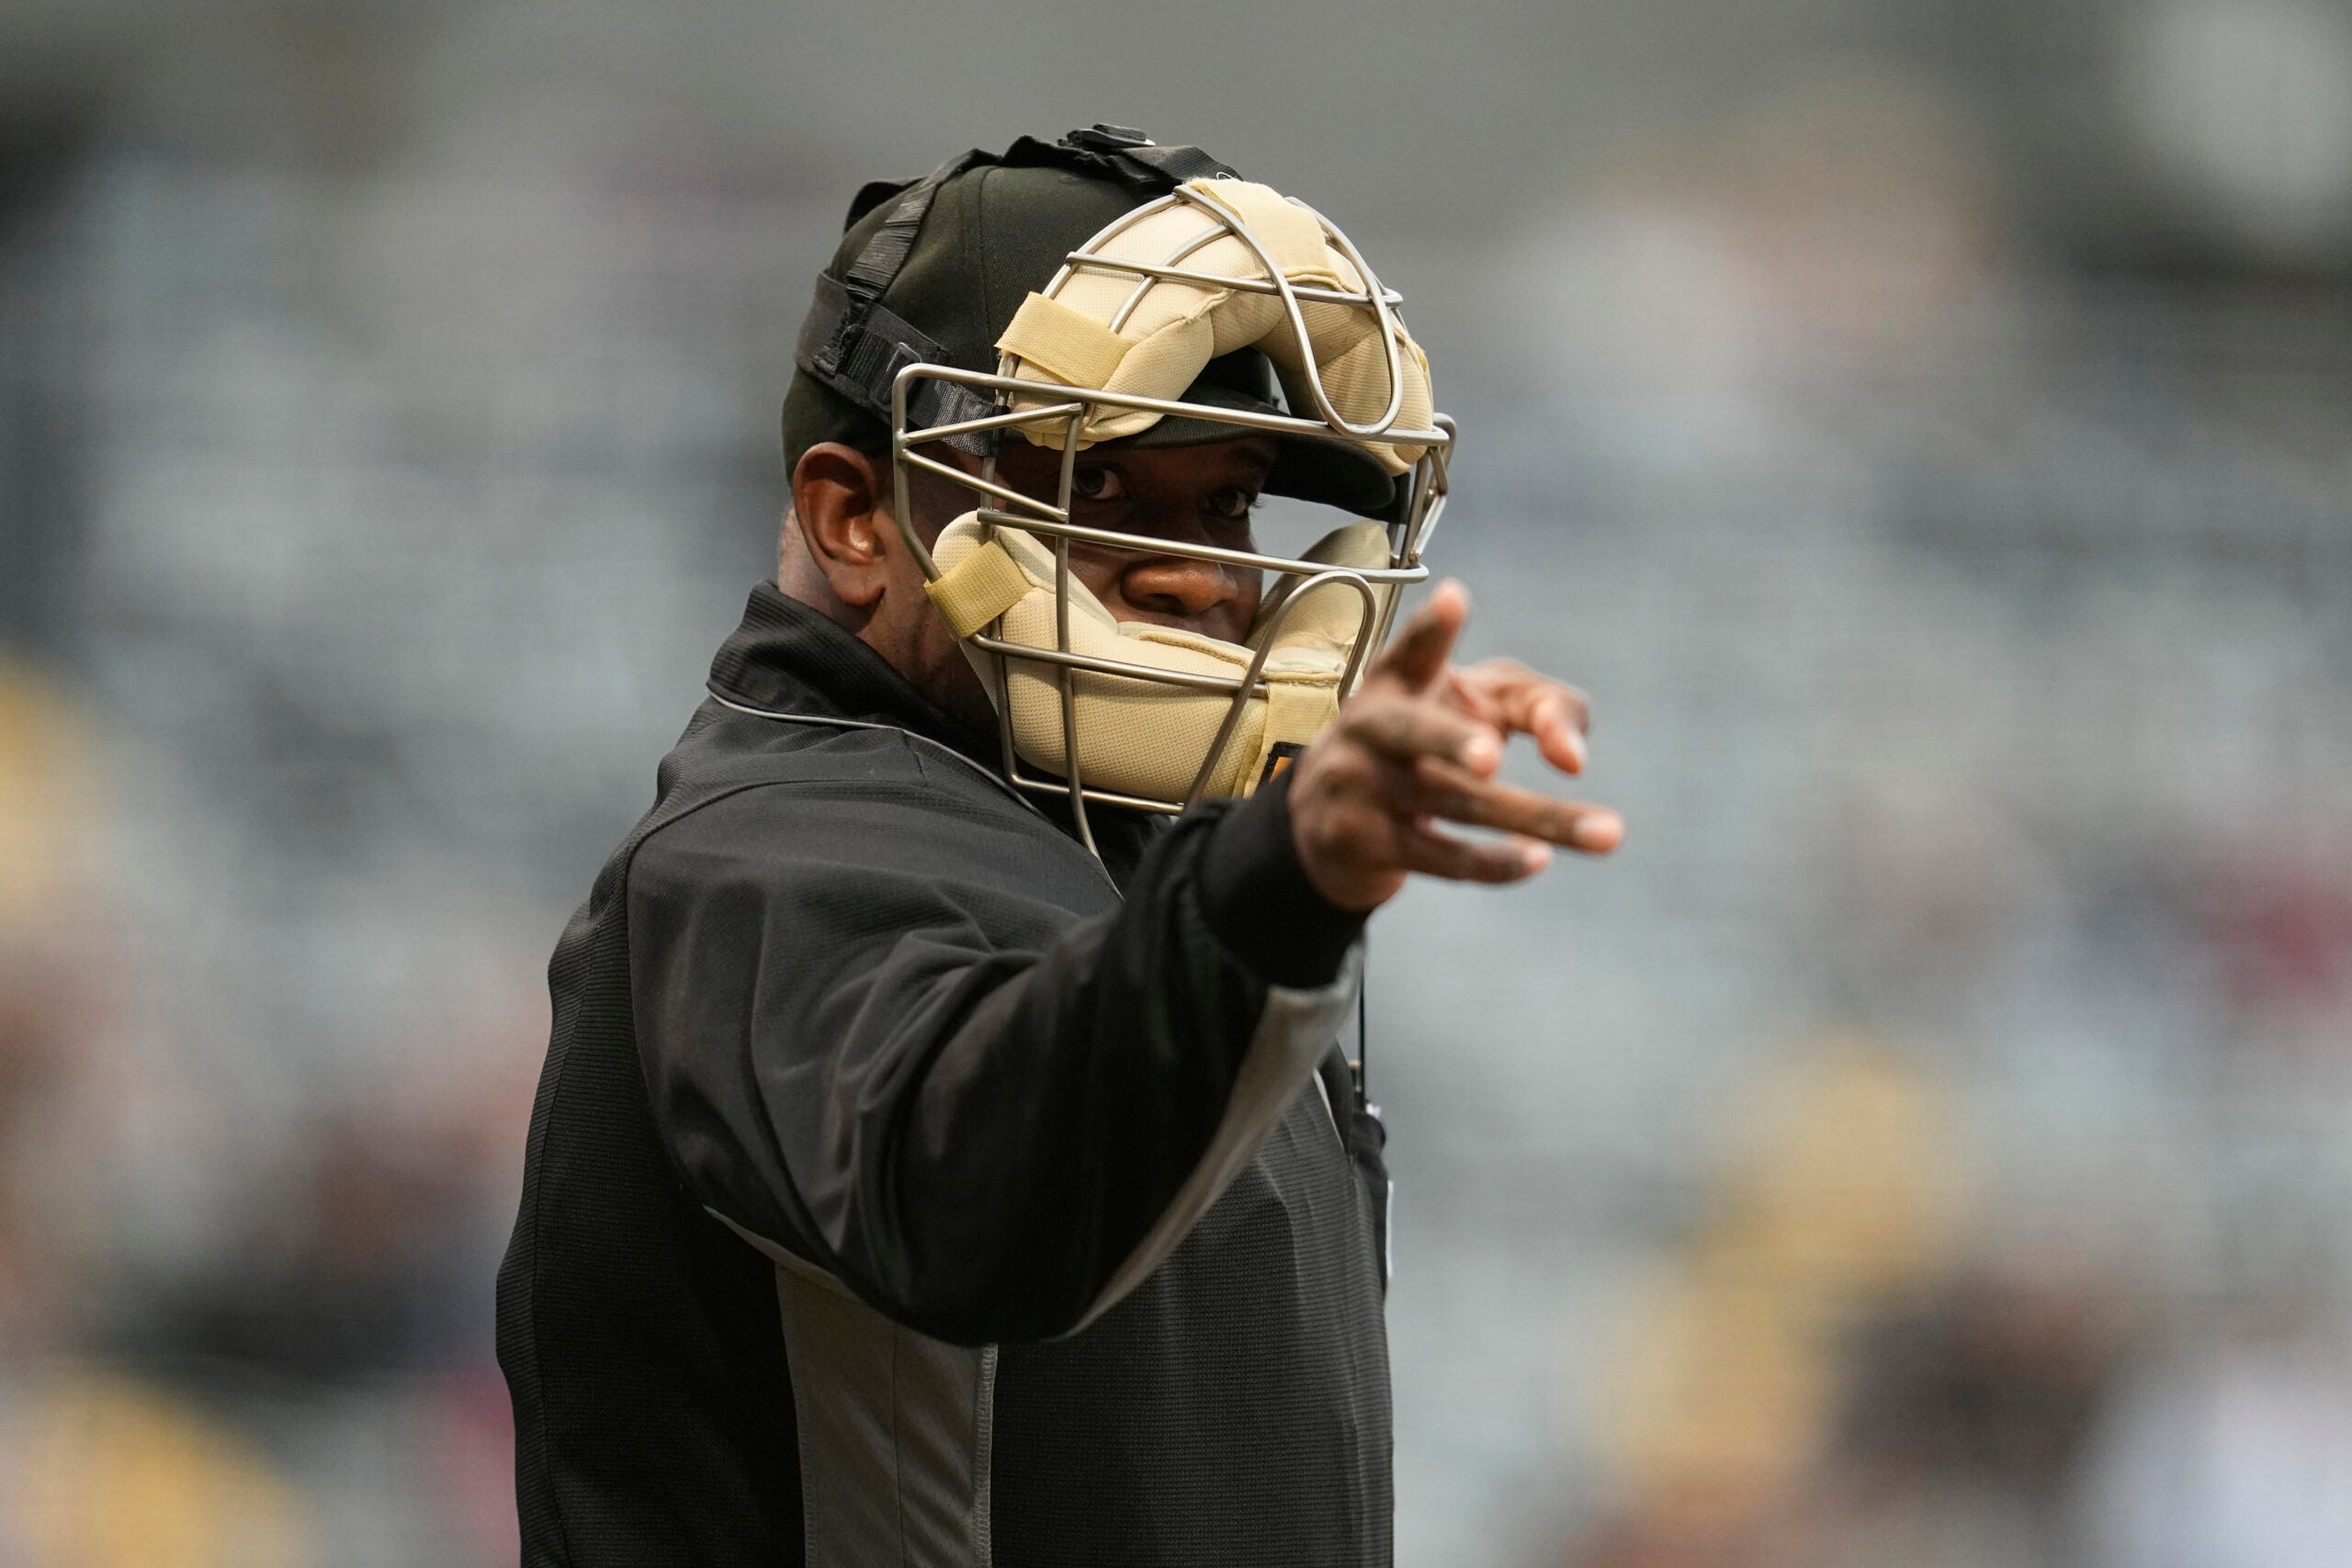 An umpire signals for a strike after being told a strike call through an earpiece during the first inning of a minor league baseball game between the St. Paul Saints and the Nashville Sounds.